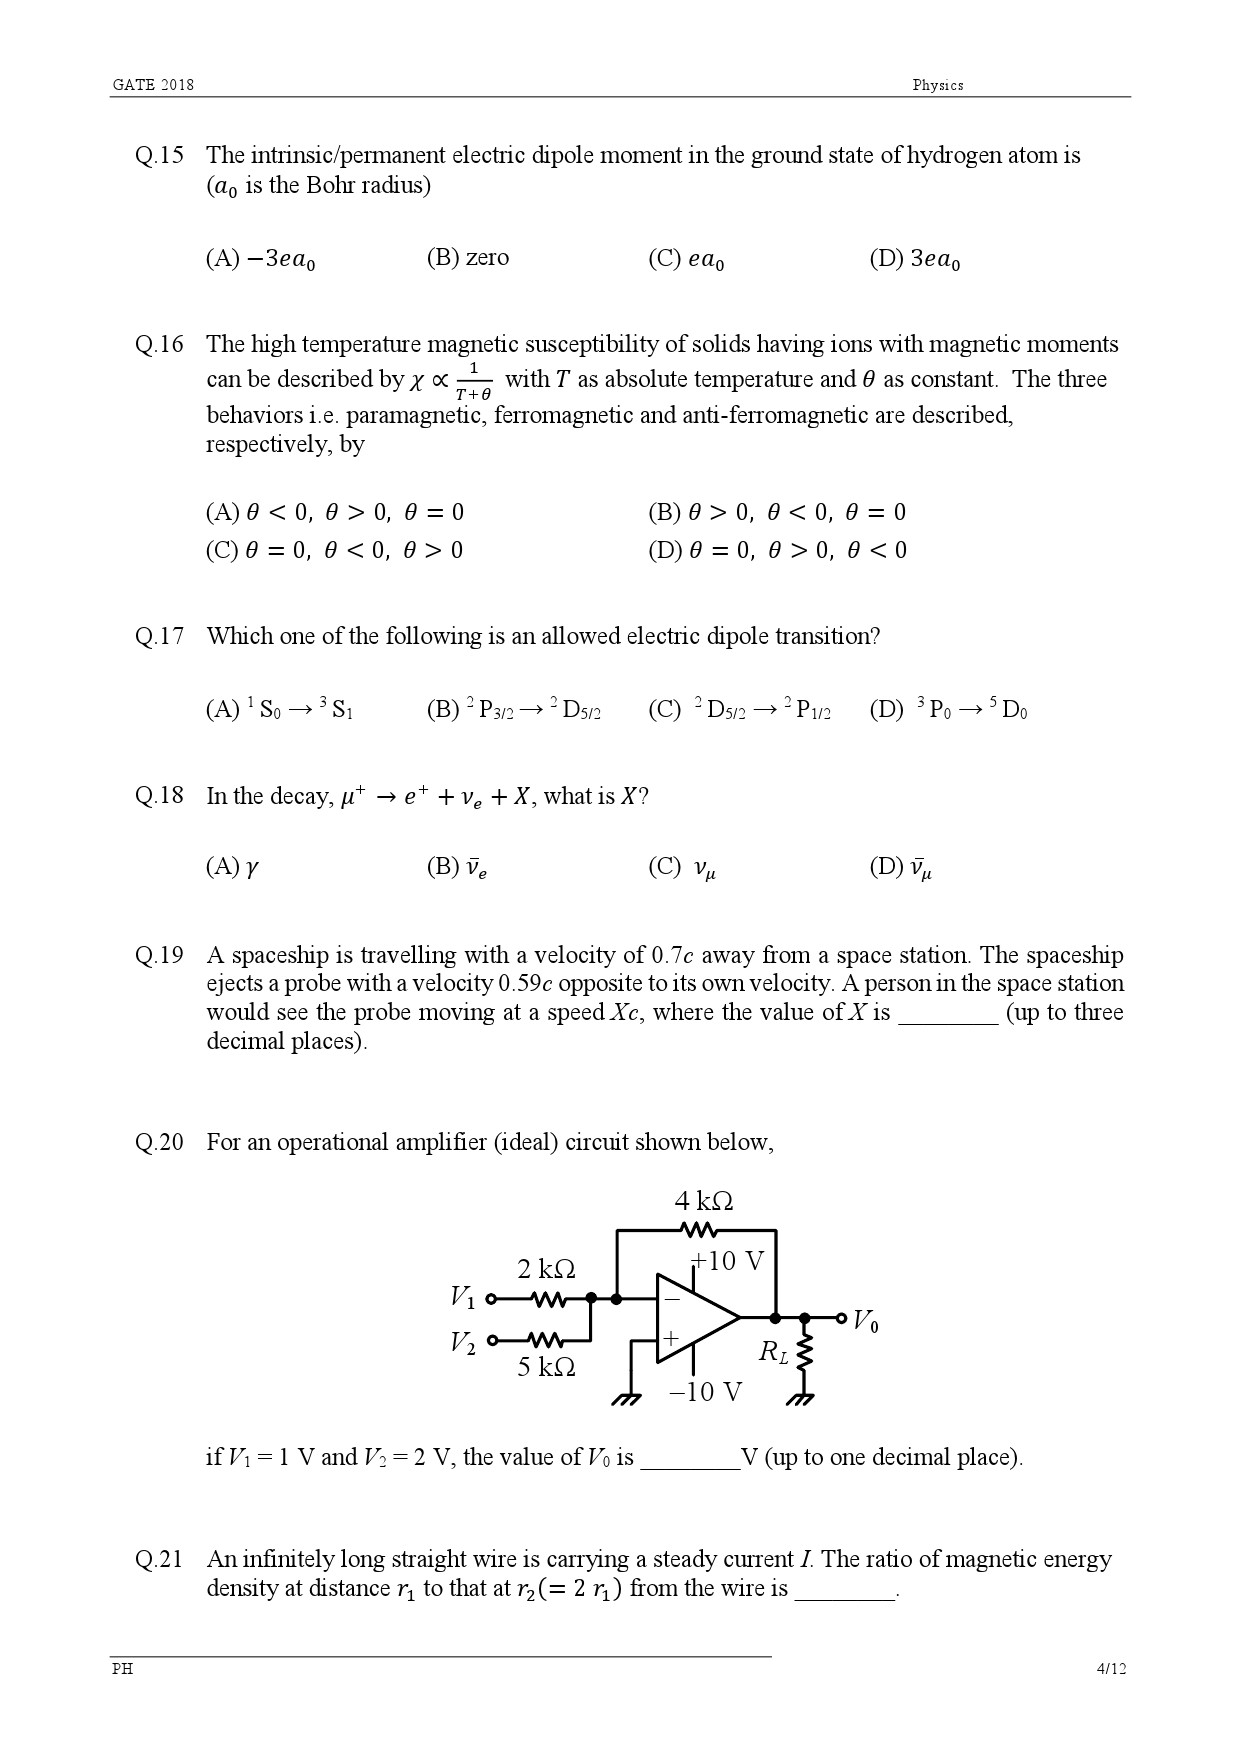 GATE Exam Question Paper 2018 Physics 6